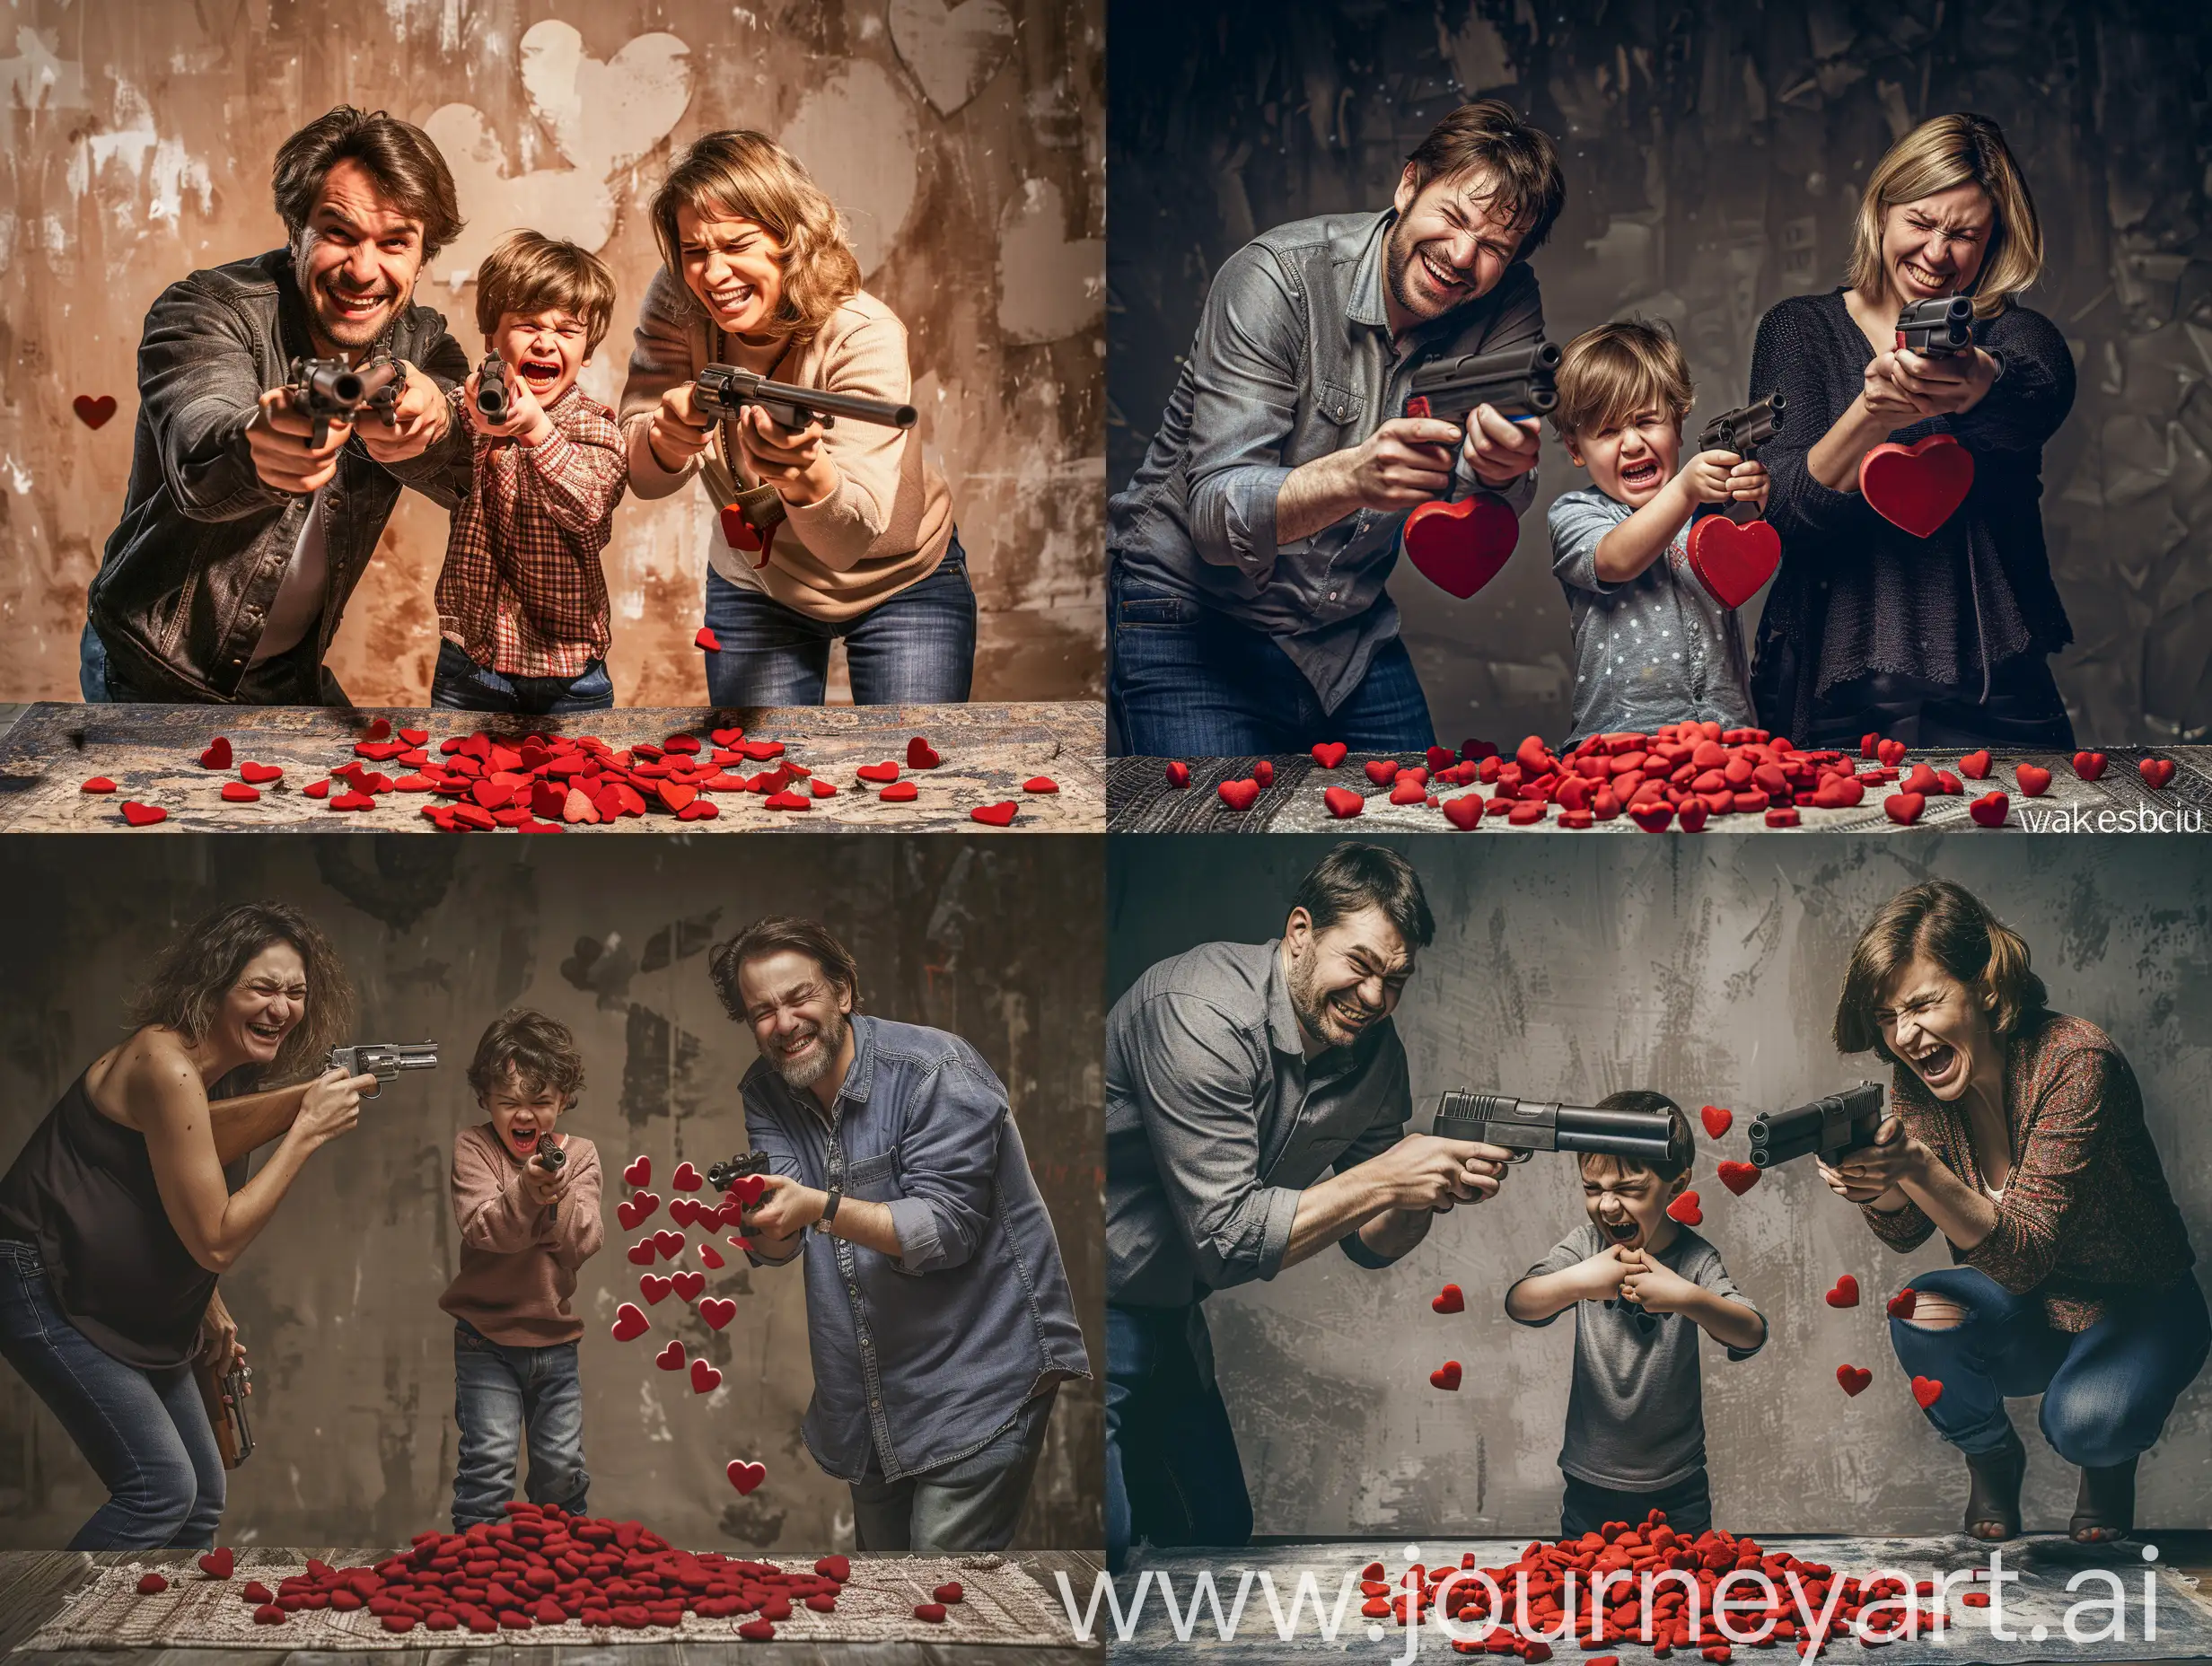 Cinematic dark horror photo of Middle-aged man and woman smiling Turning to face the boy standing between them. They held guns and shot many hearts out of the barrels at the cute little boy standing between them. The little child was crying and in pain. There was a pile of hearts on the floor under the child's feet.